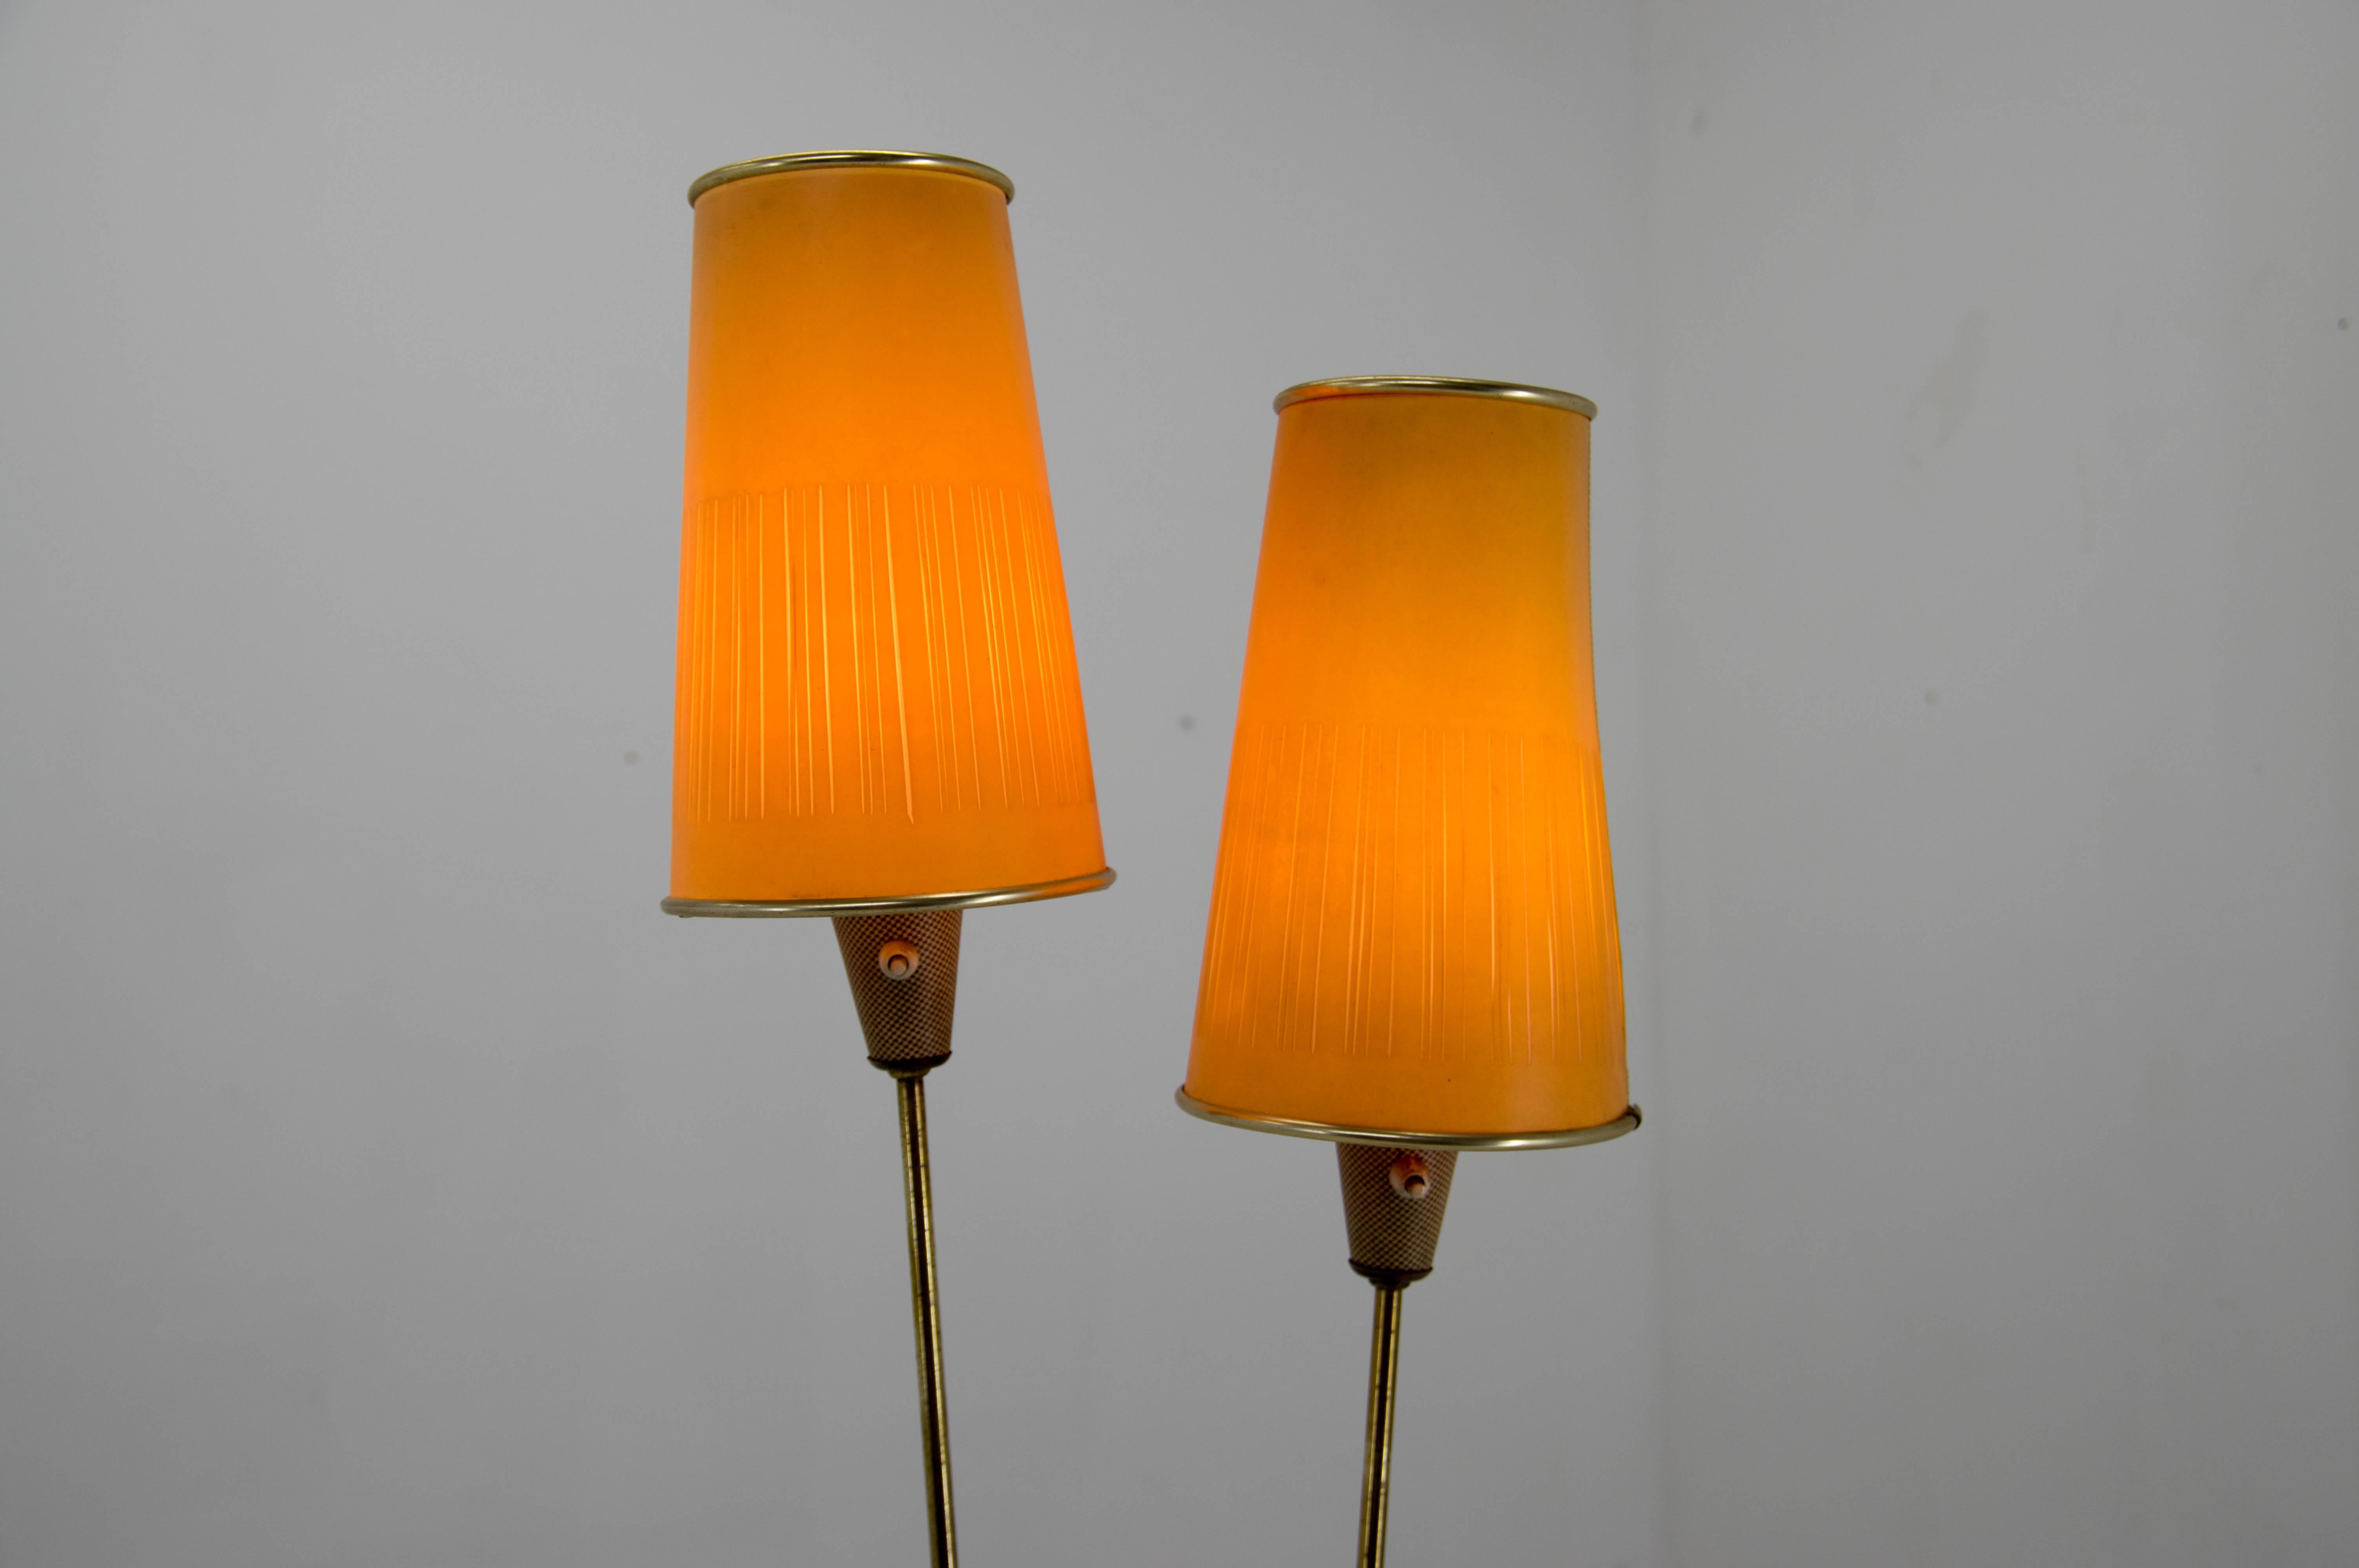 Very rare floor lamp from 1960s
Brass stand and plastic paper shades.
Each arm could be switched separately.
2x40W, E25-E27 bulbs
US plug adapter including
US wiring compatible.